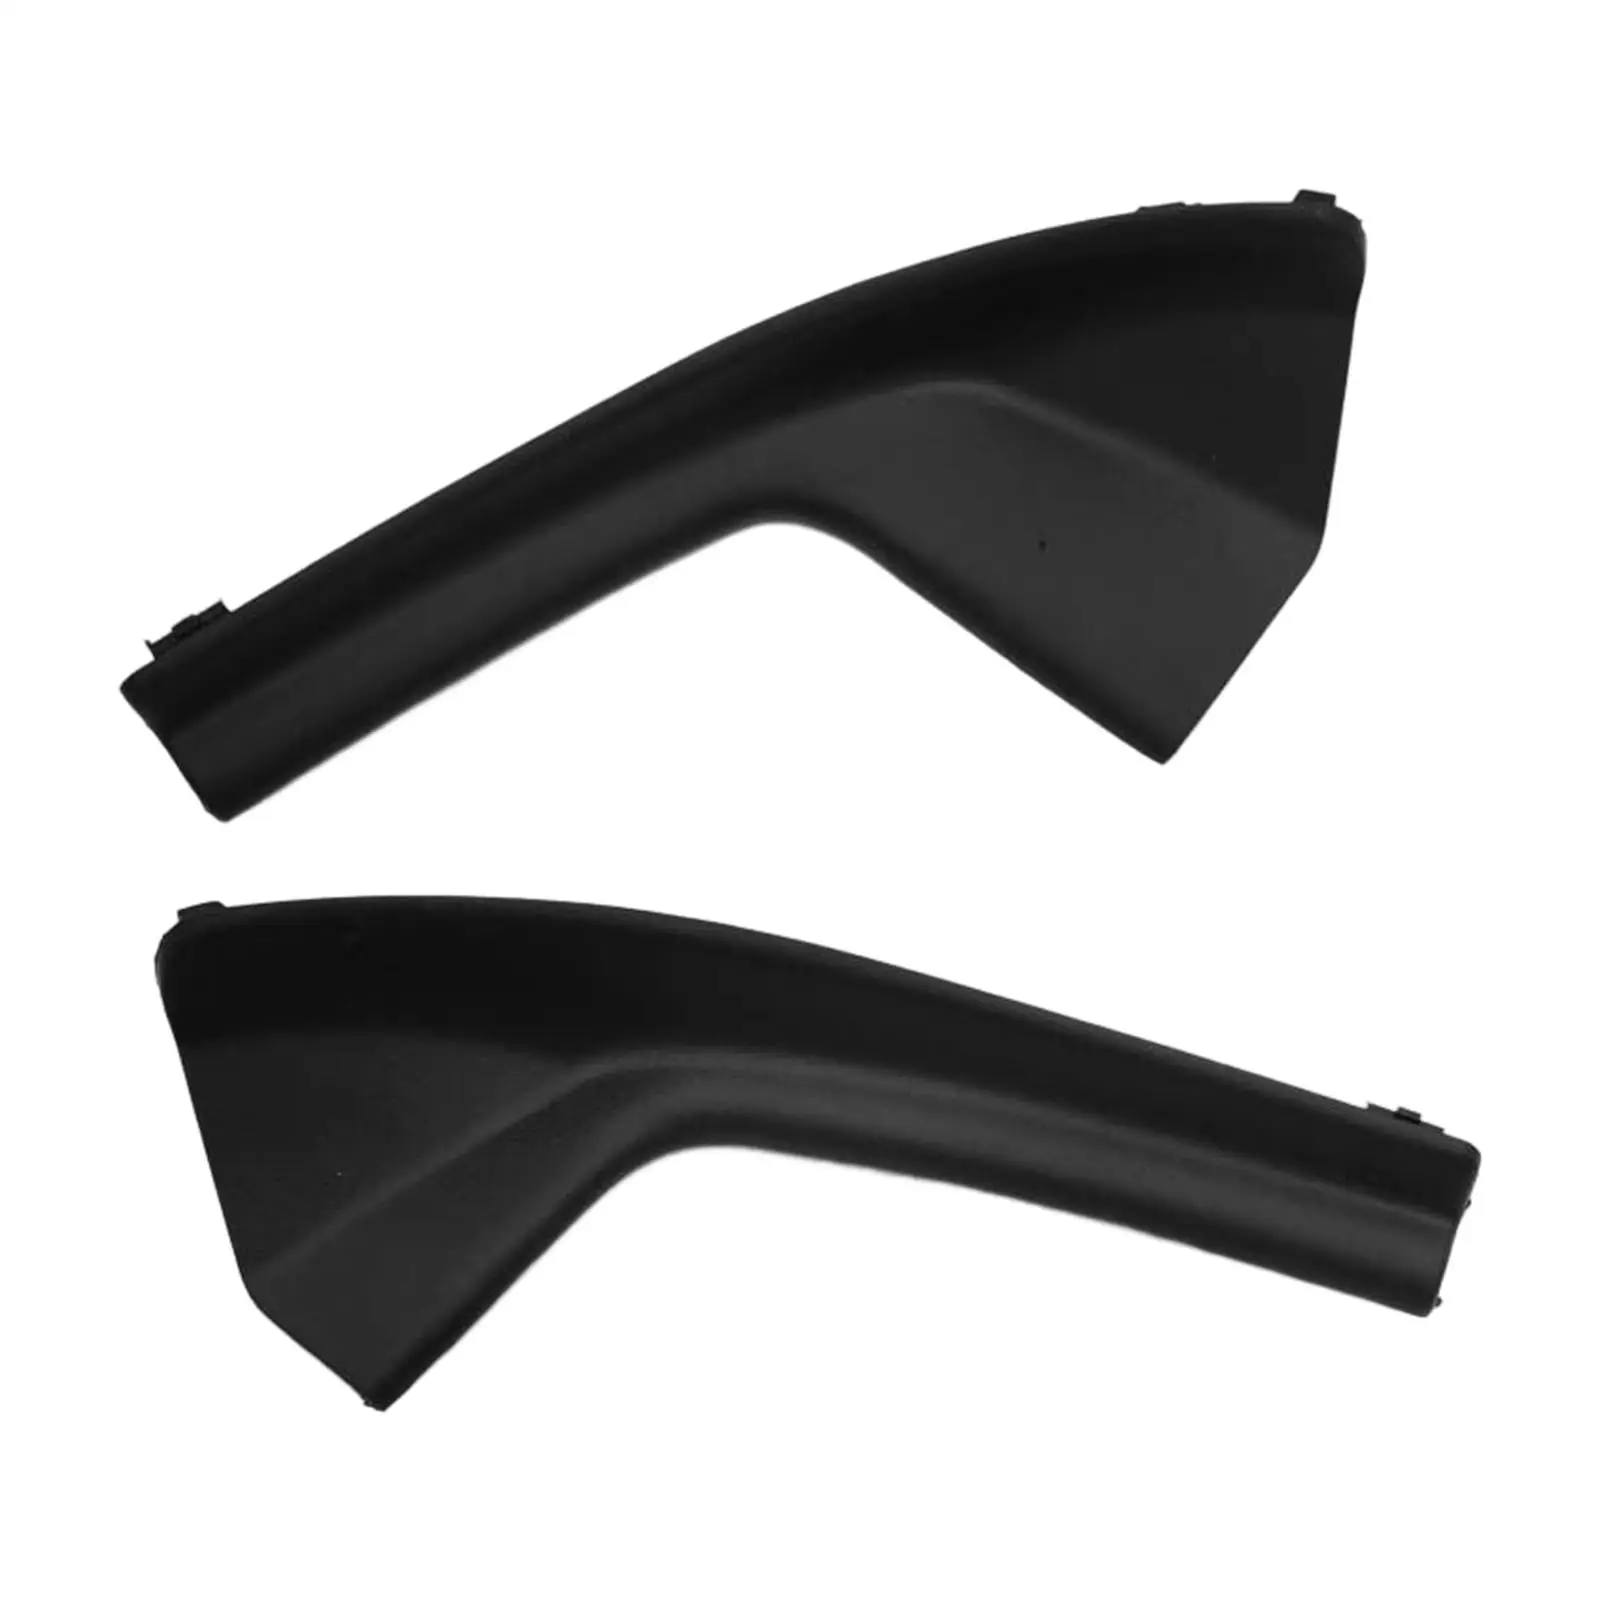 2x Windshield Wiper Cowl Cover Trims 66895-ed50A for Nissan Versa